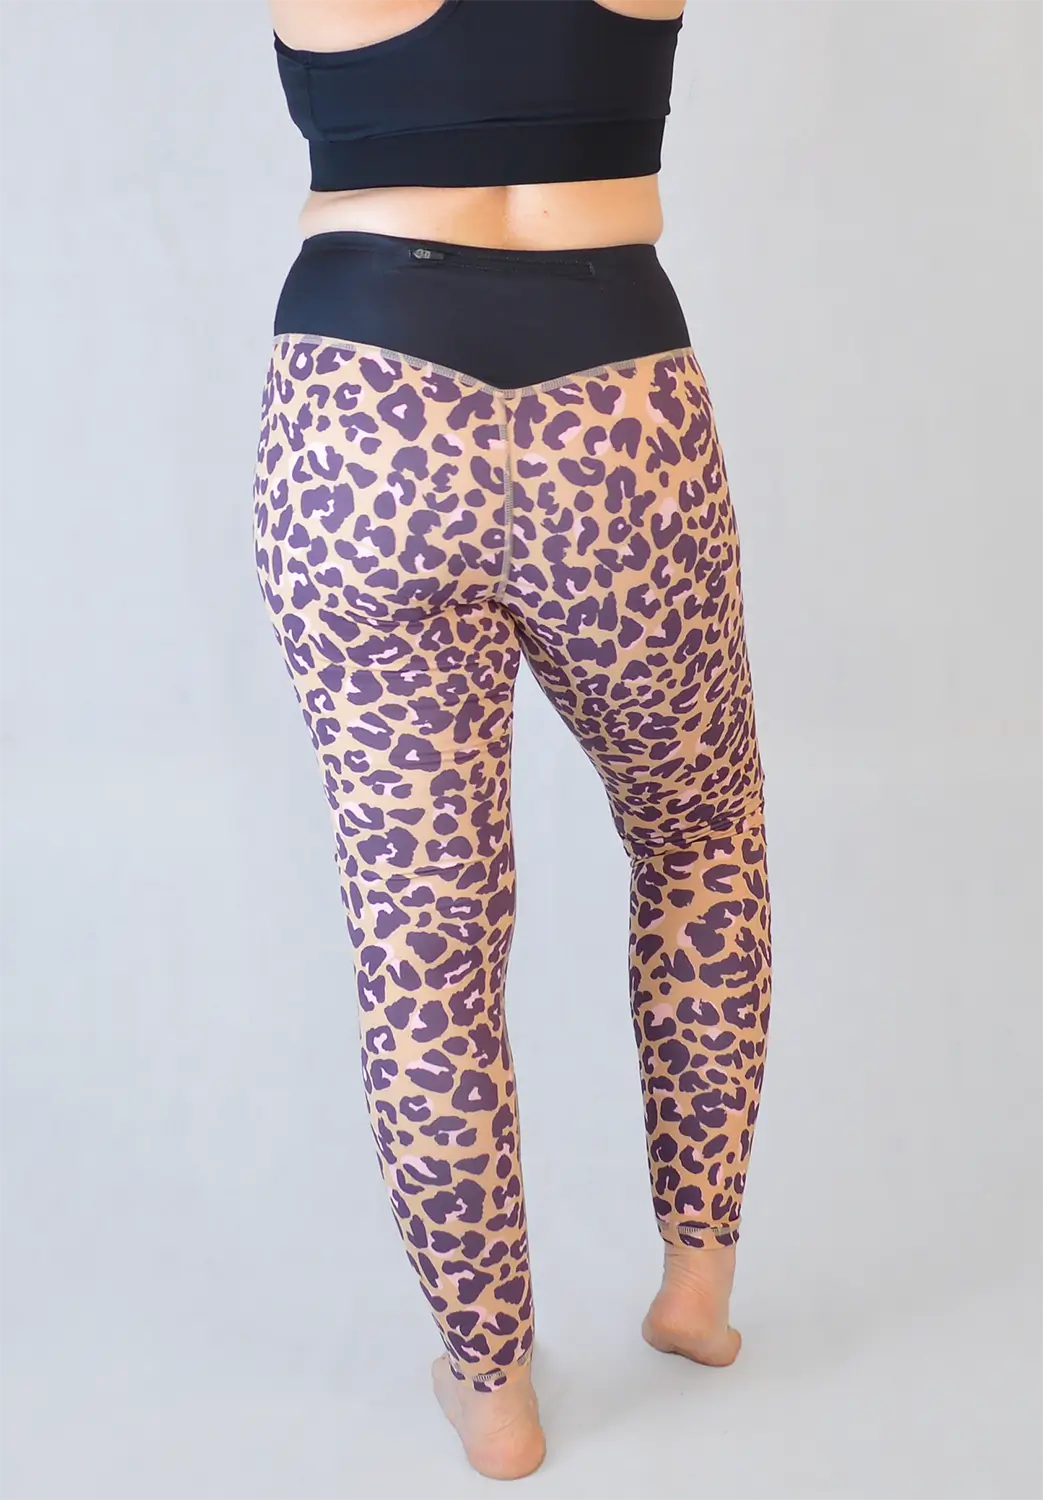 High Waisted Gym Leggings For Women - LC Active Fierce